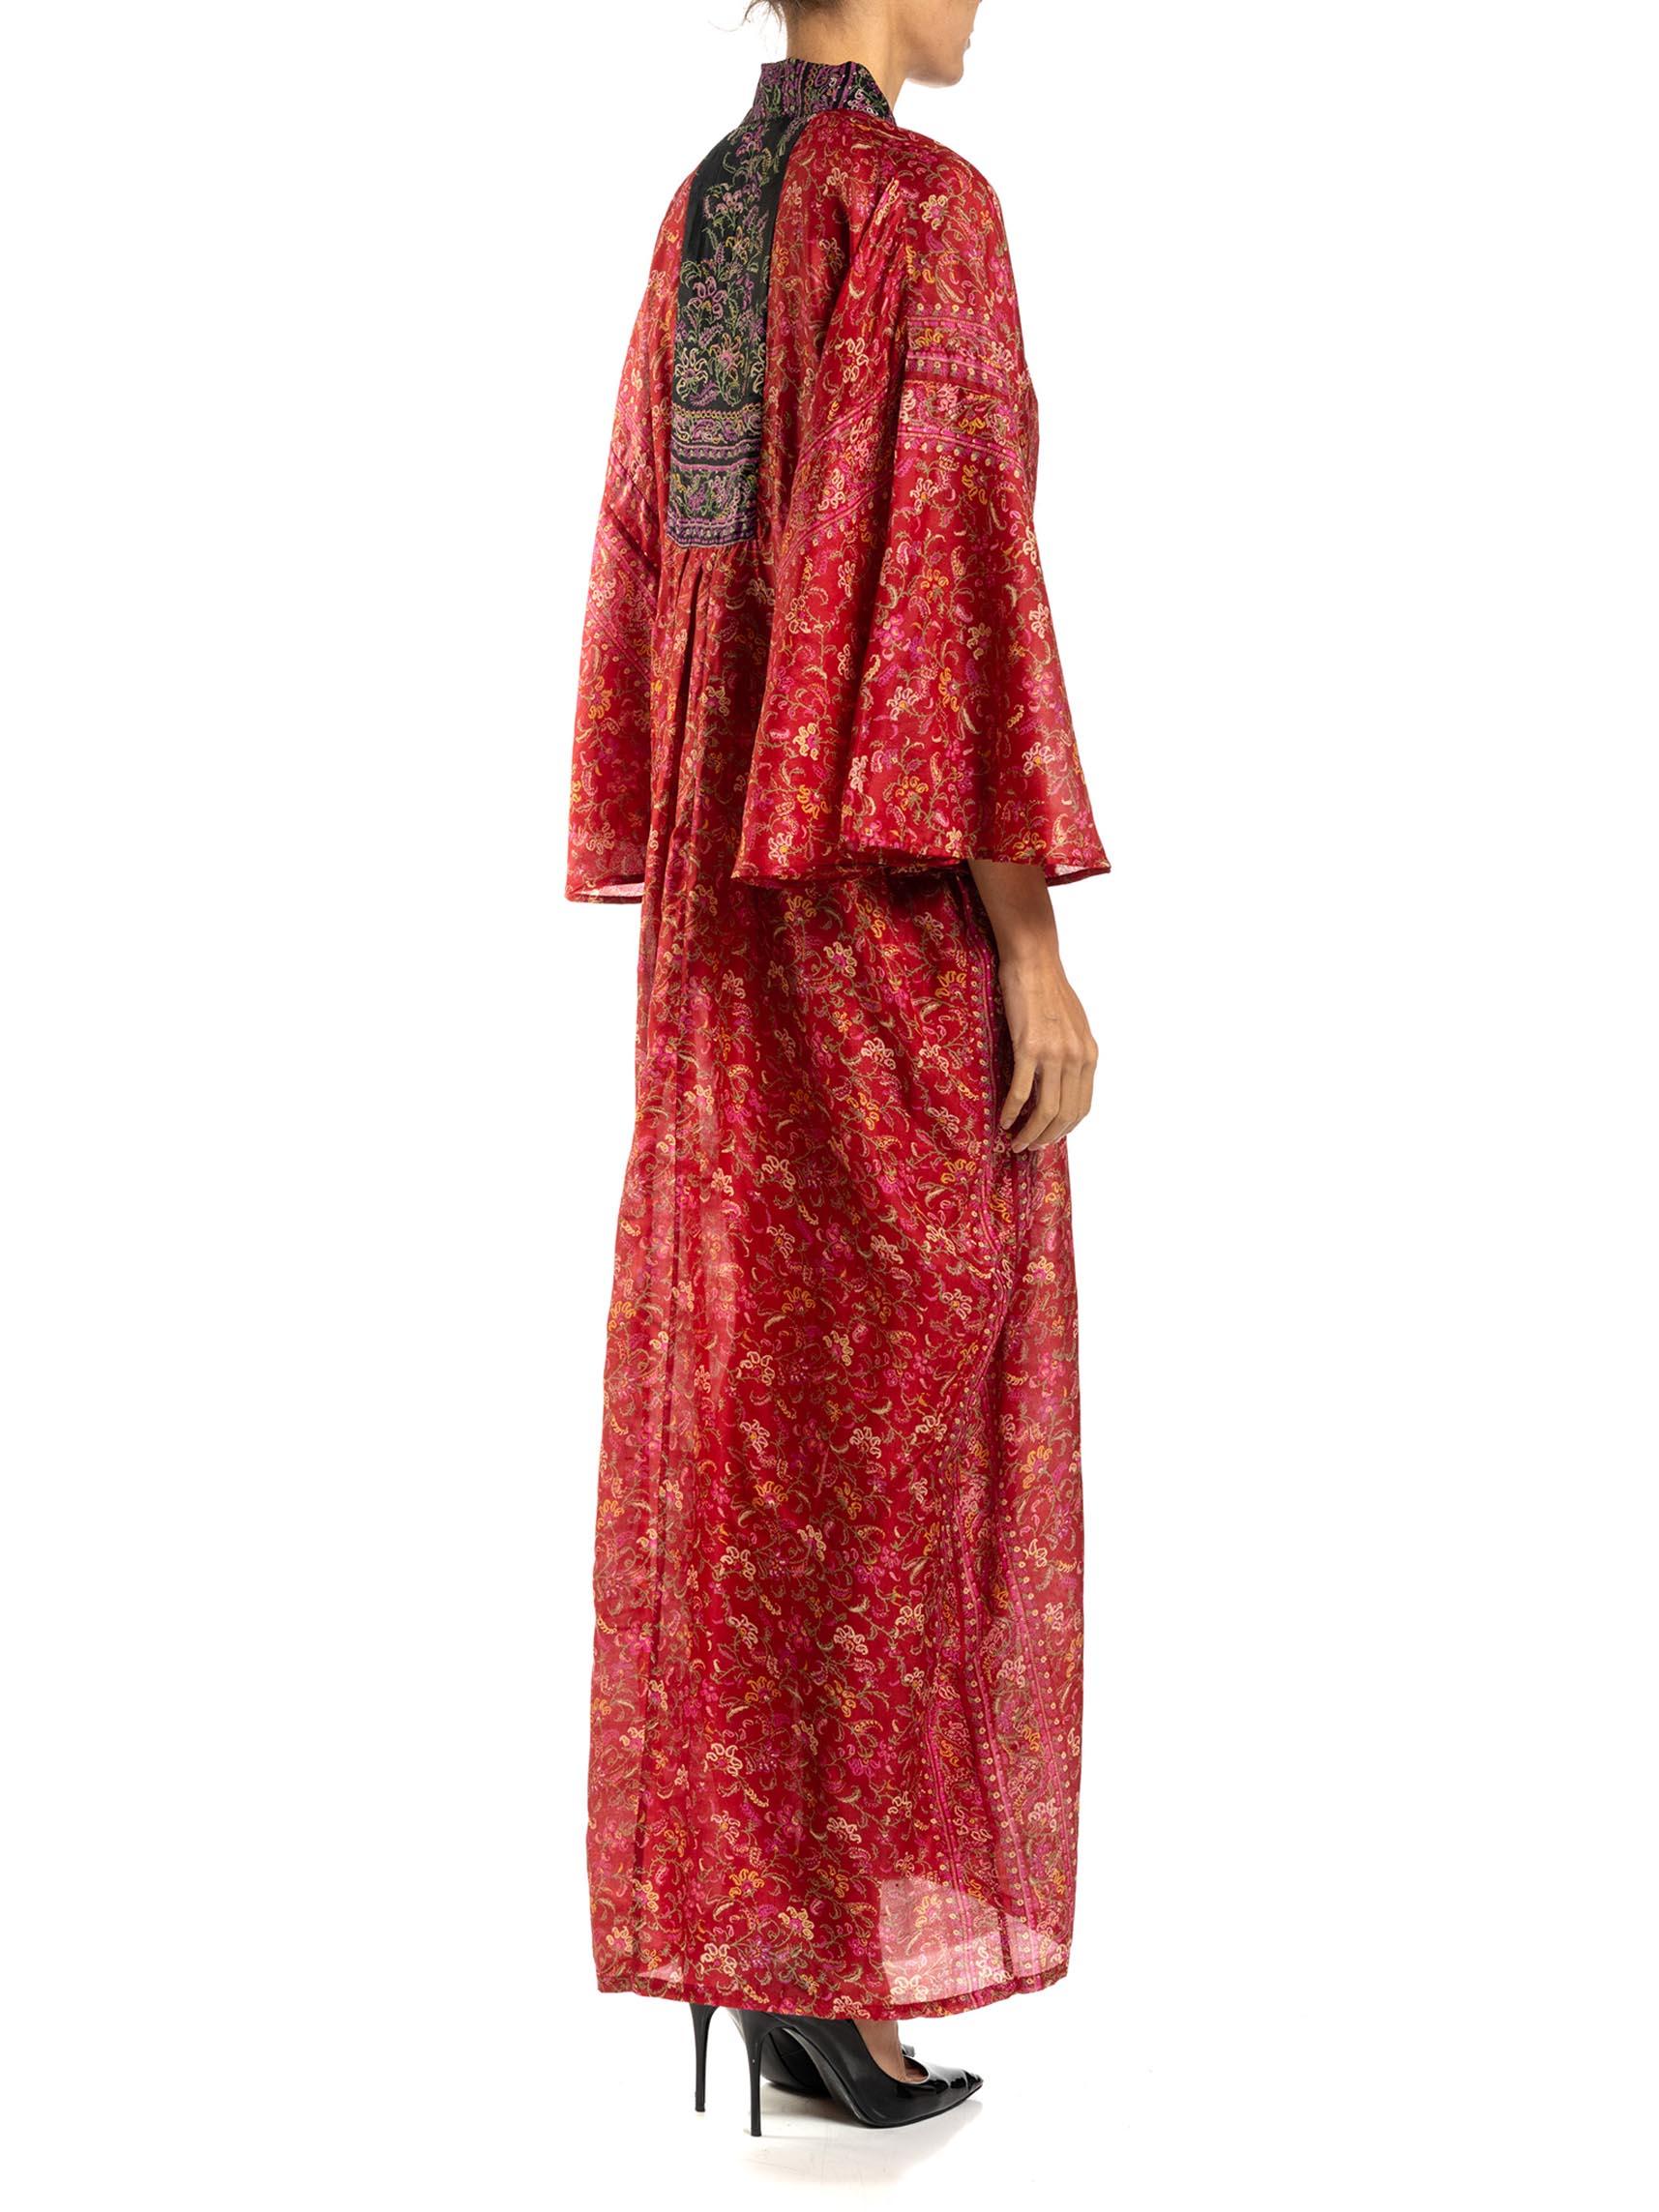 MORPHEW COLLECTION Red & Black Paisley Silk Floral Kaftan Made From Vintage Sari For Sale 1